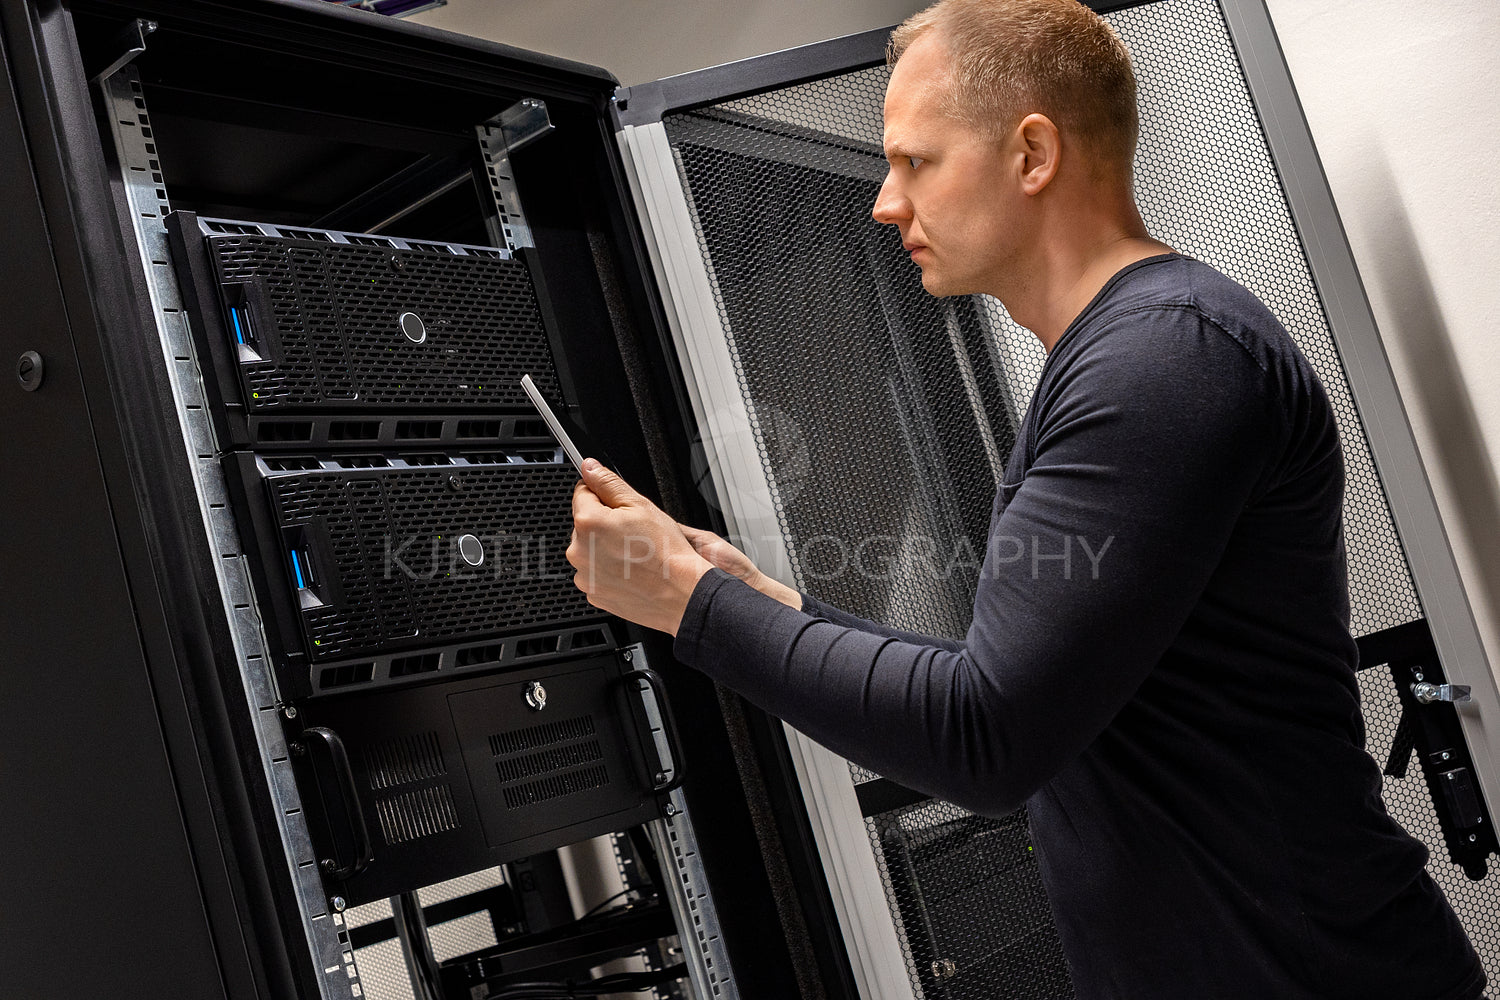 IT Support Holding Digital Tablet Analyzing Servers And Network In Datacenter